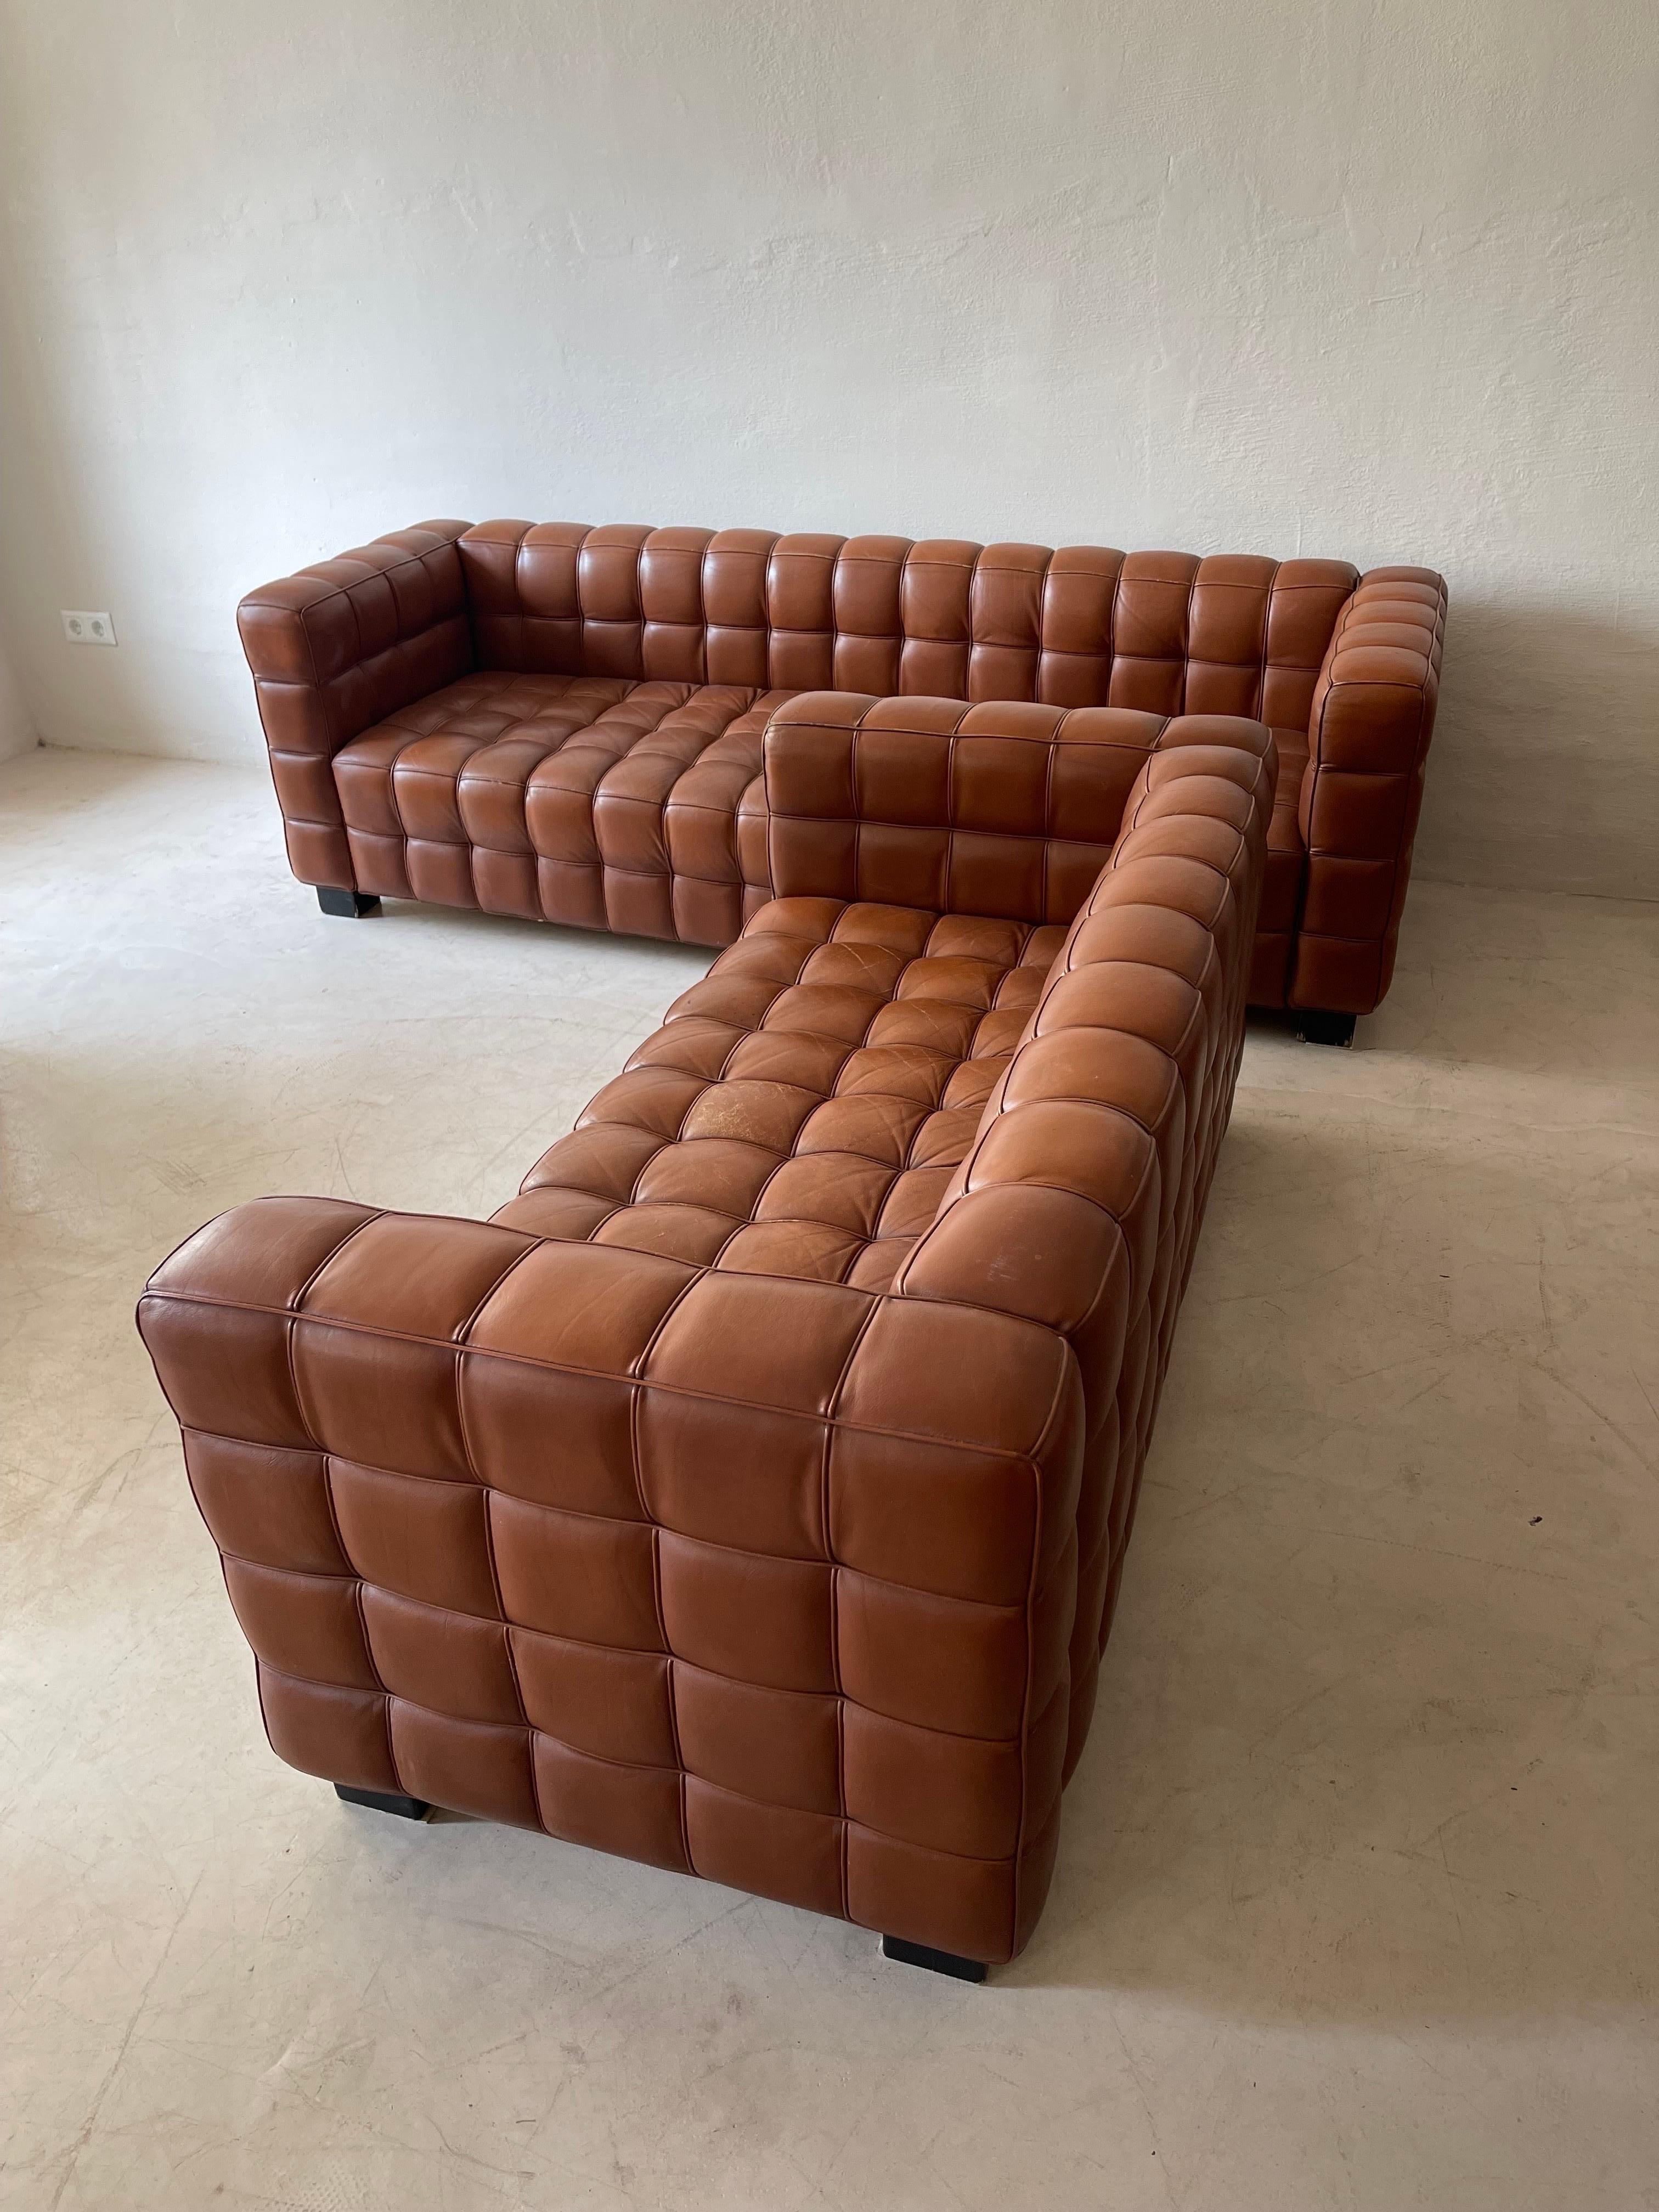 Josef Hoffmann Kubus Sofa in patinated Original Leather by Wittmann, Set of Two  In Good Condition For Sale In Vienna, AT